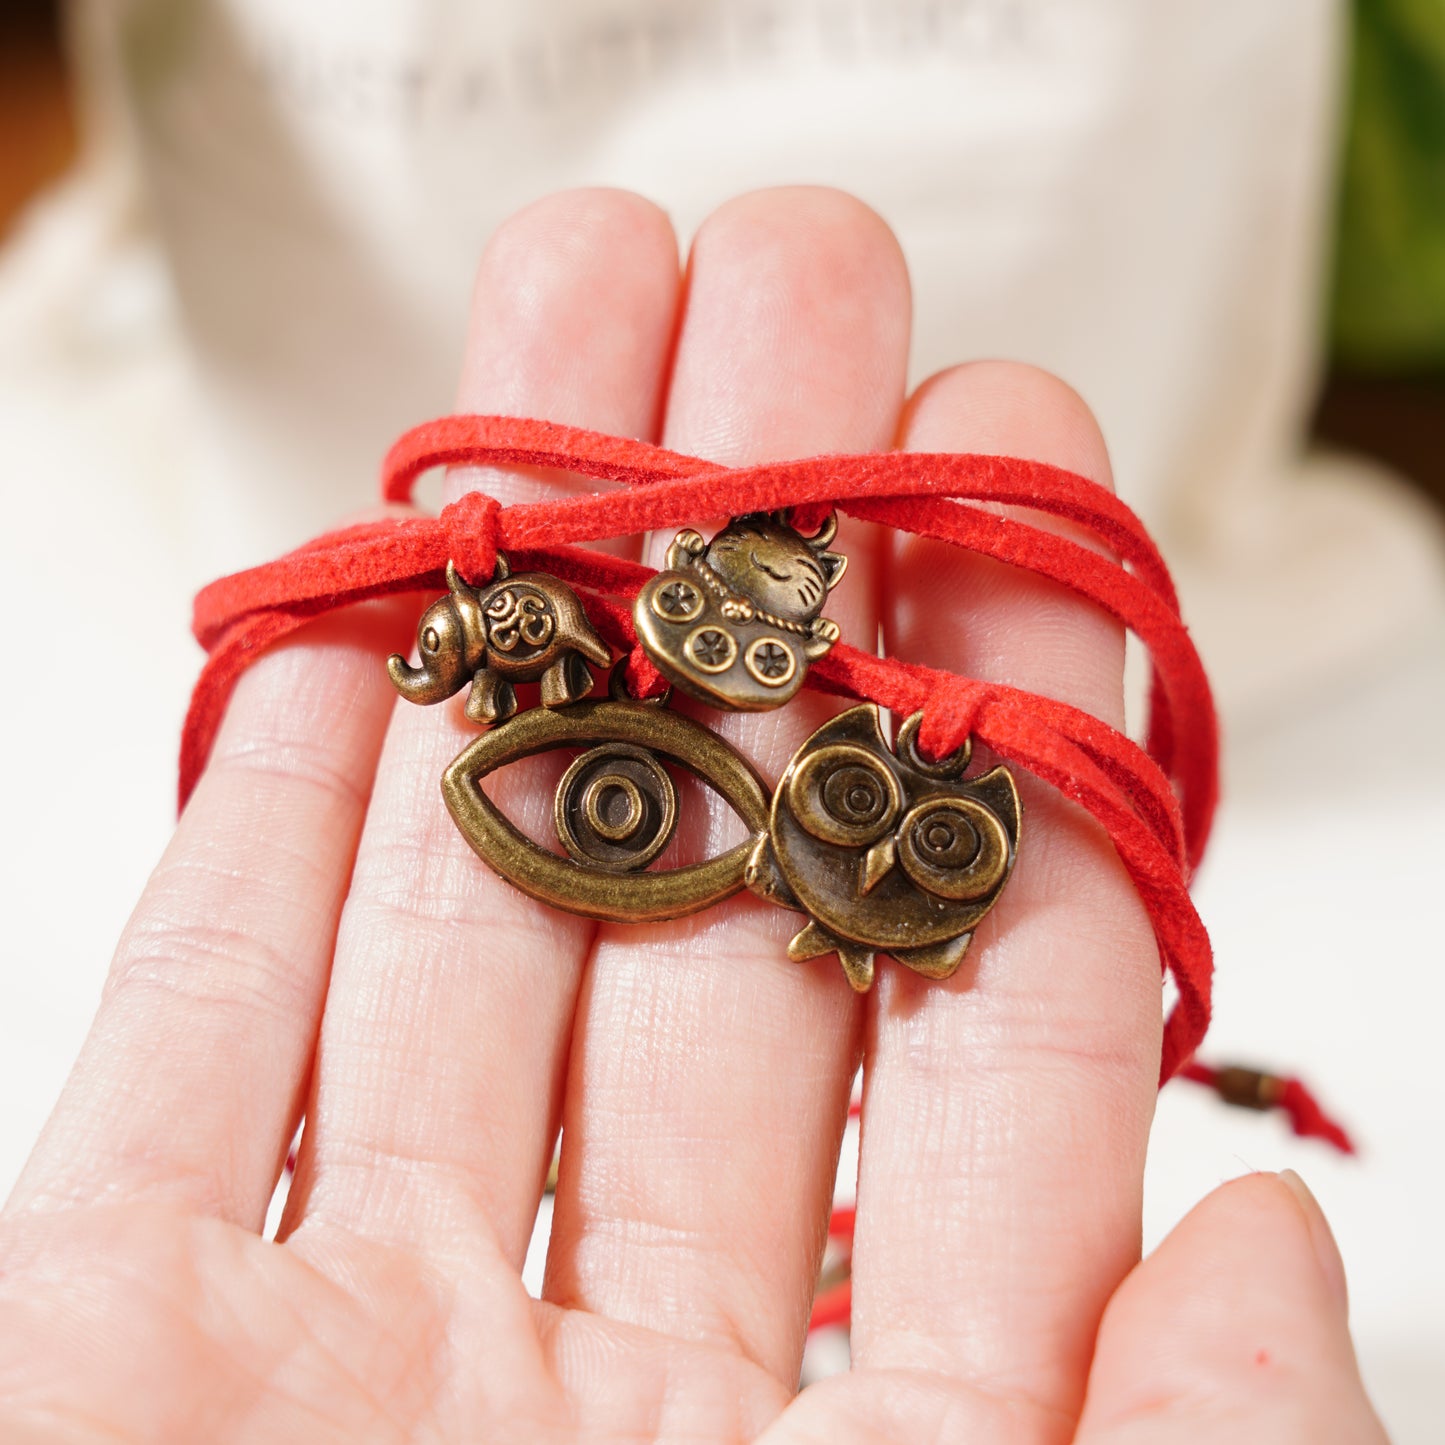 Lucky Bracelet Set For Good Luck, Wealth, Wisdom, and Protection - Red